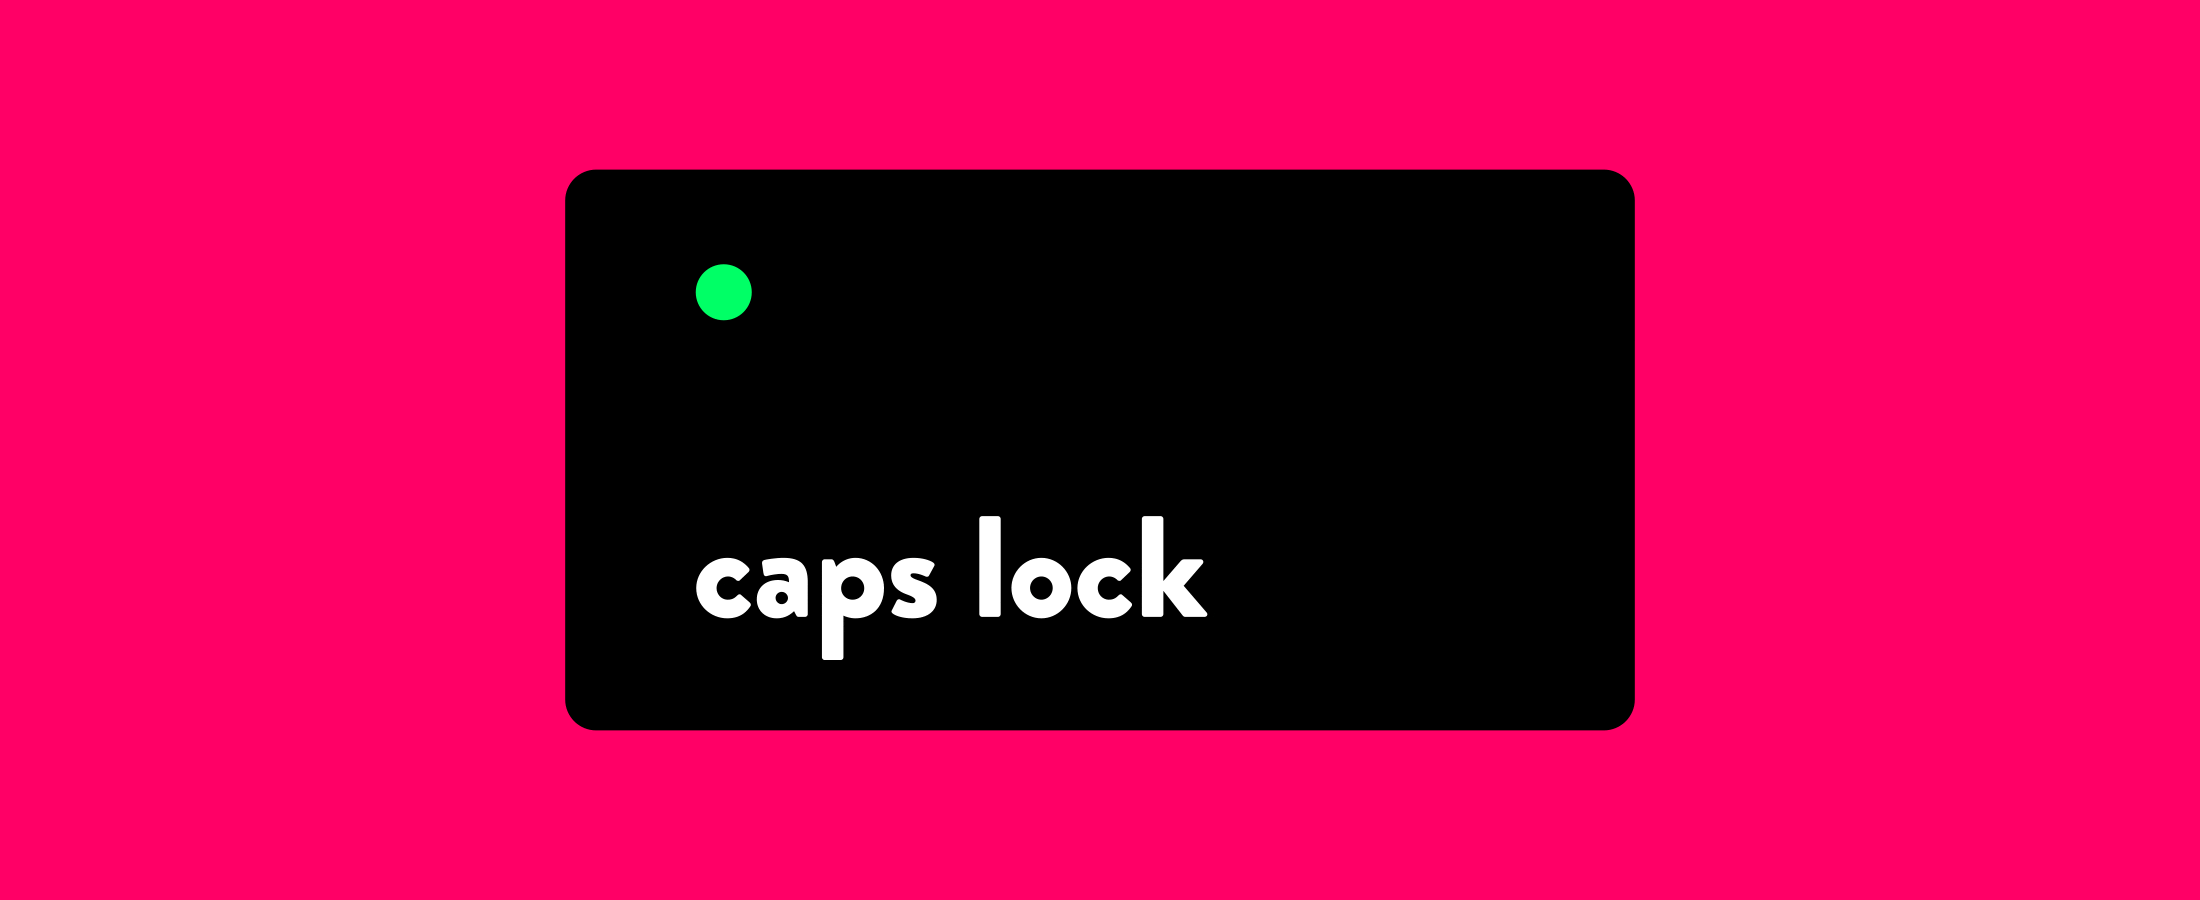 It's time for Caps Lock to die. MAKING THE CASE FOR REPLACING CAPS LOCK |  by Daniel Colin James | Forward Tick | Medium